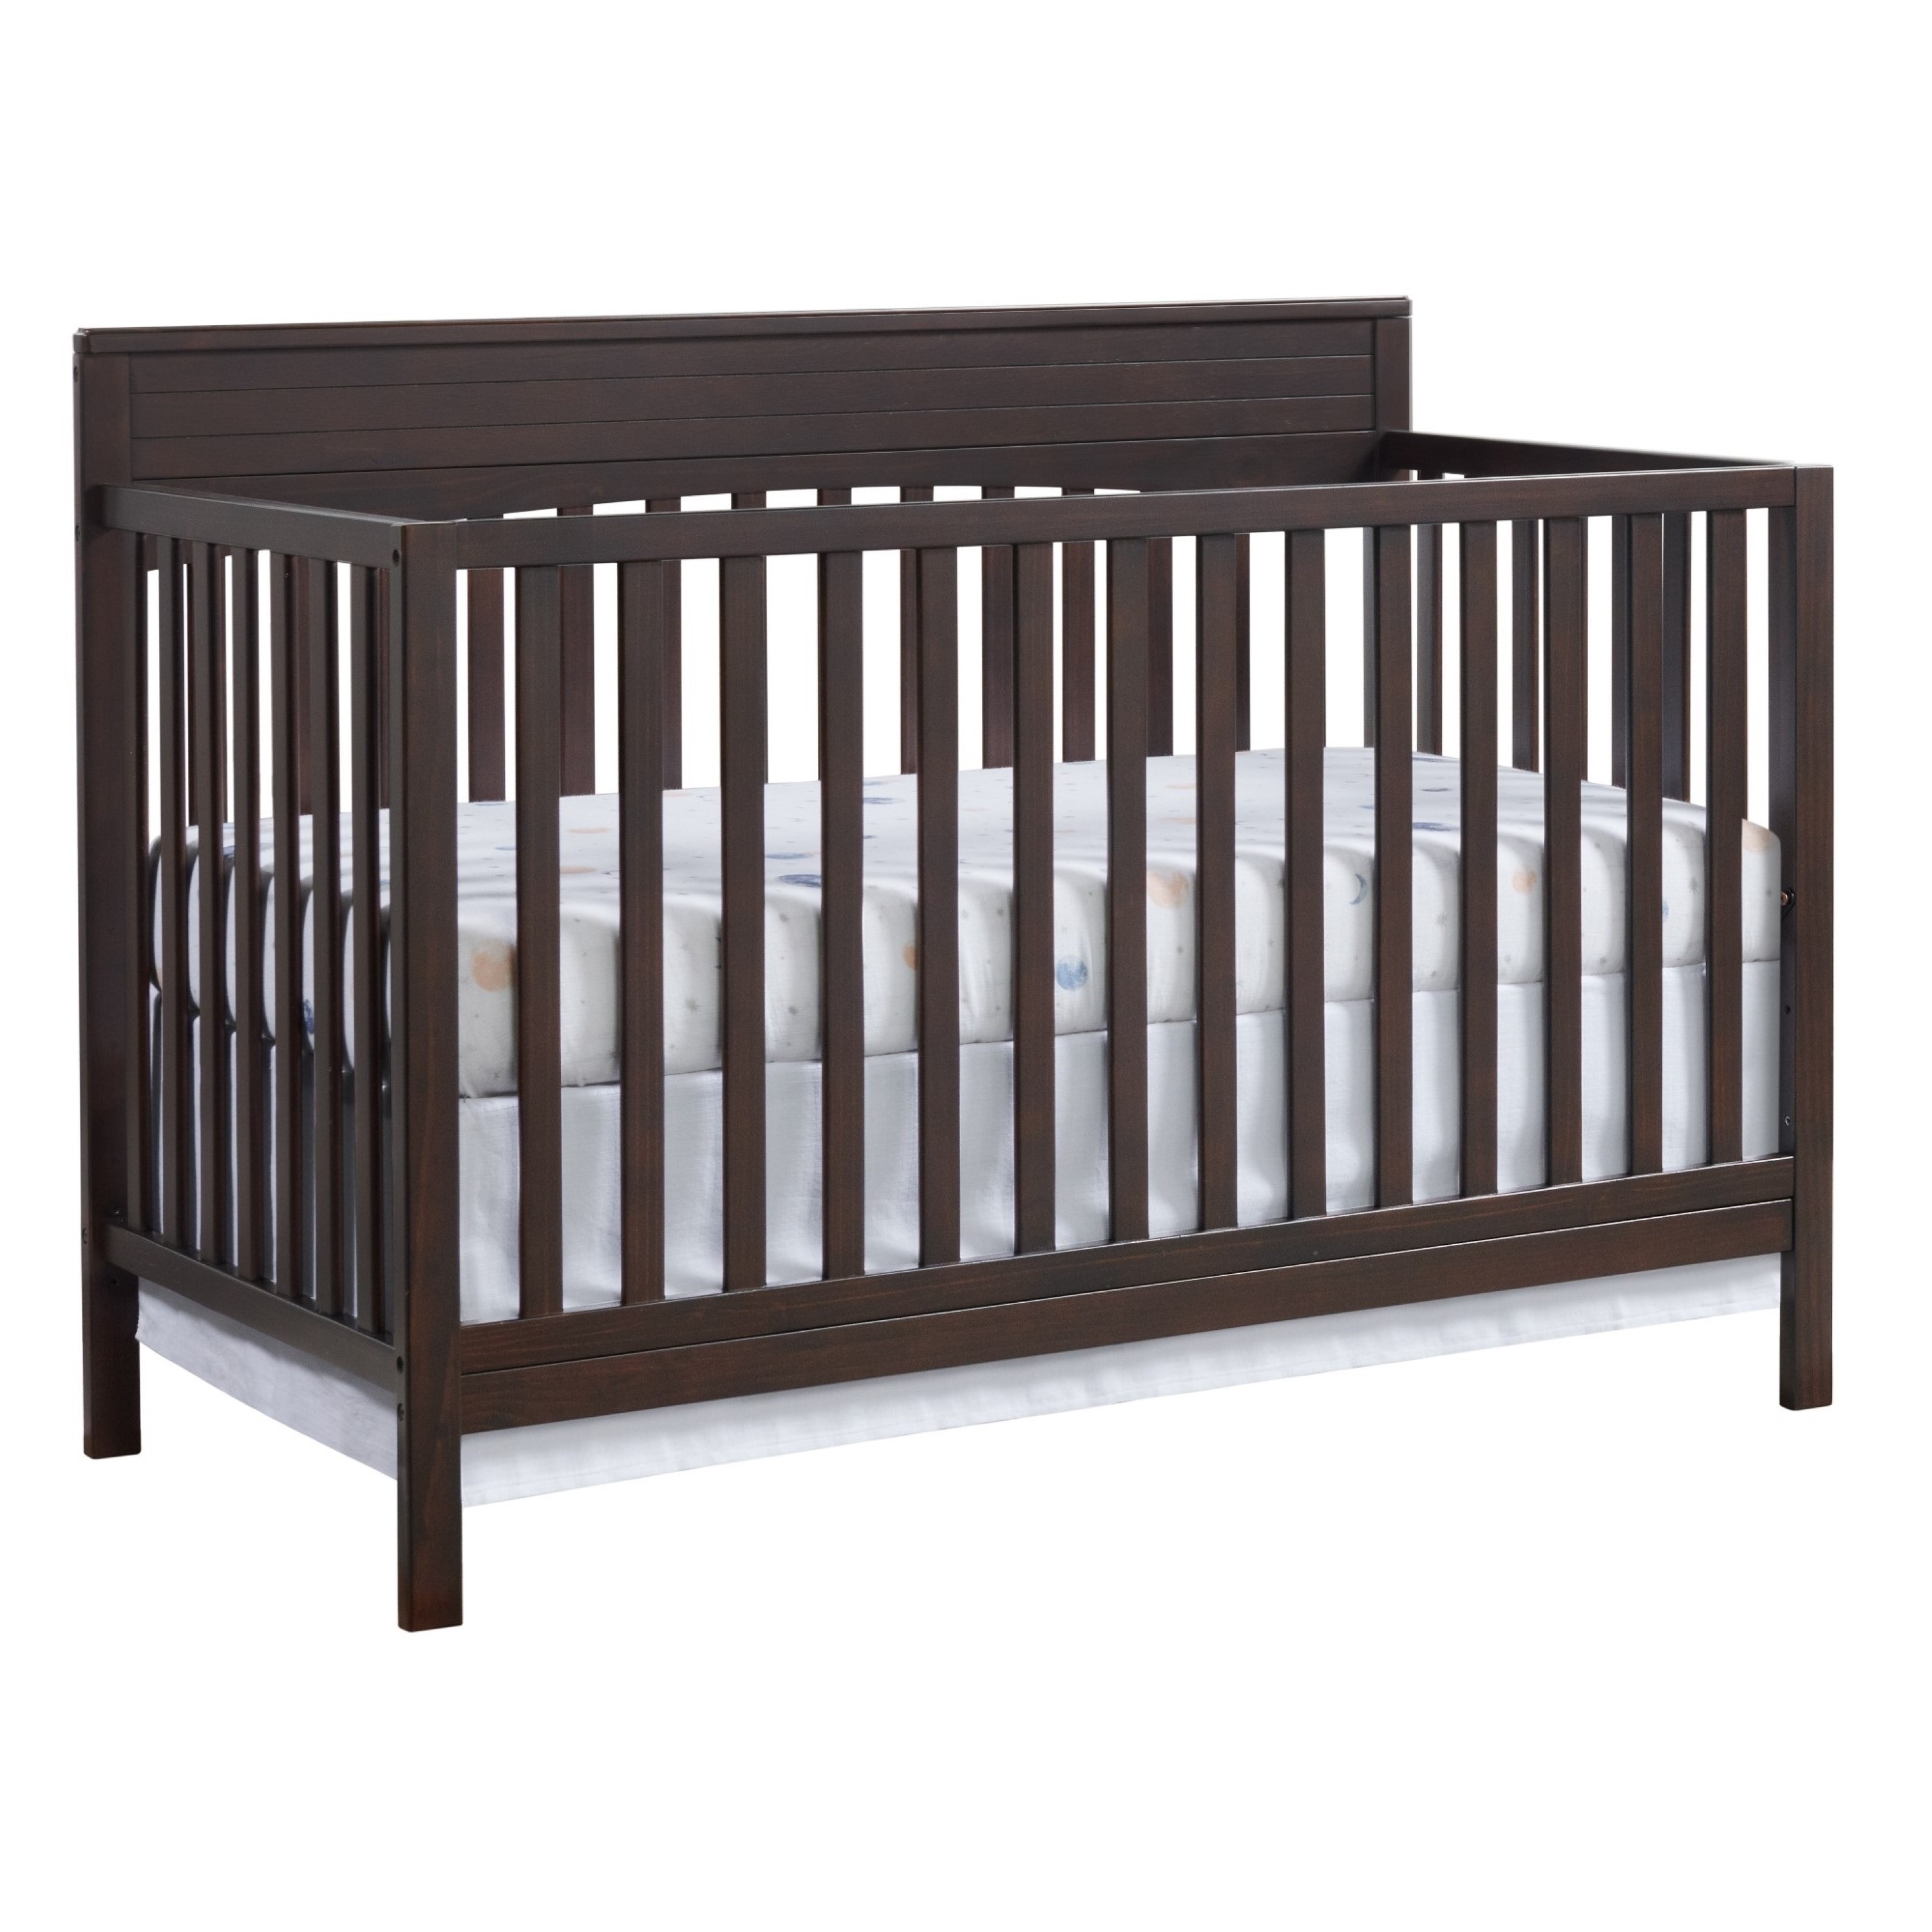 Oxford Baby Harper 4-in-1 Convertible Crib, Espresso Brown, GREENGUARD Gold Certified, Wooden Crib - image 5 of 11